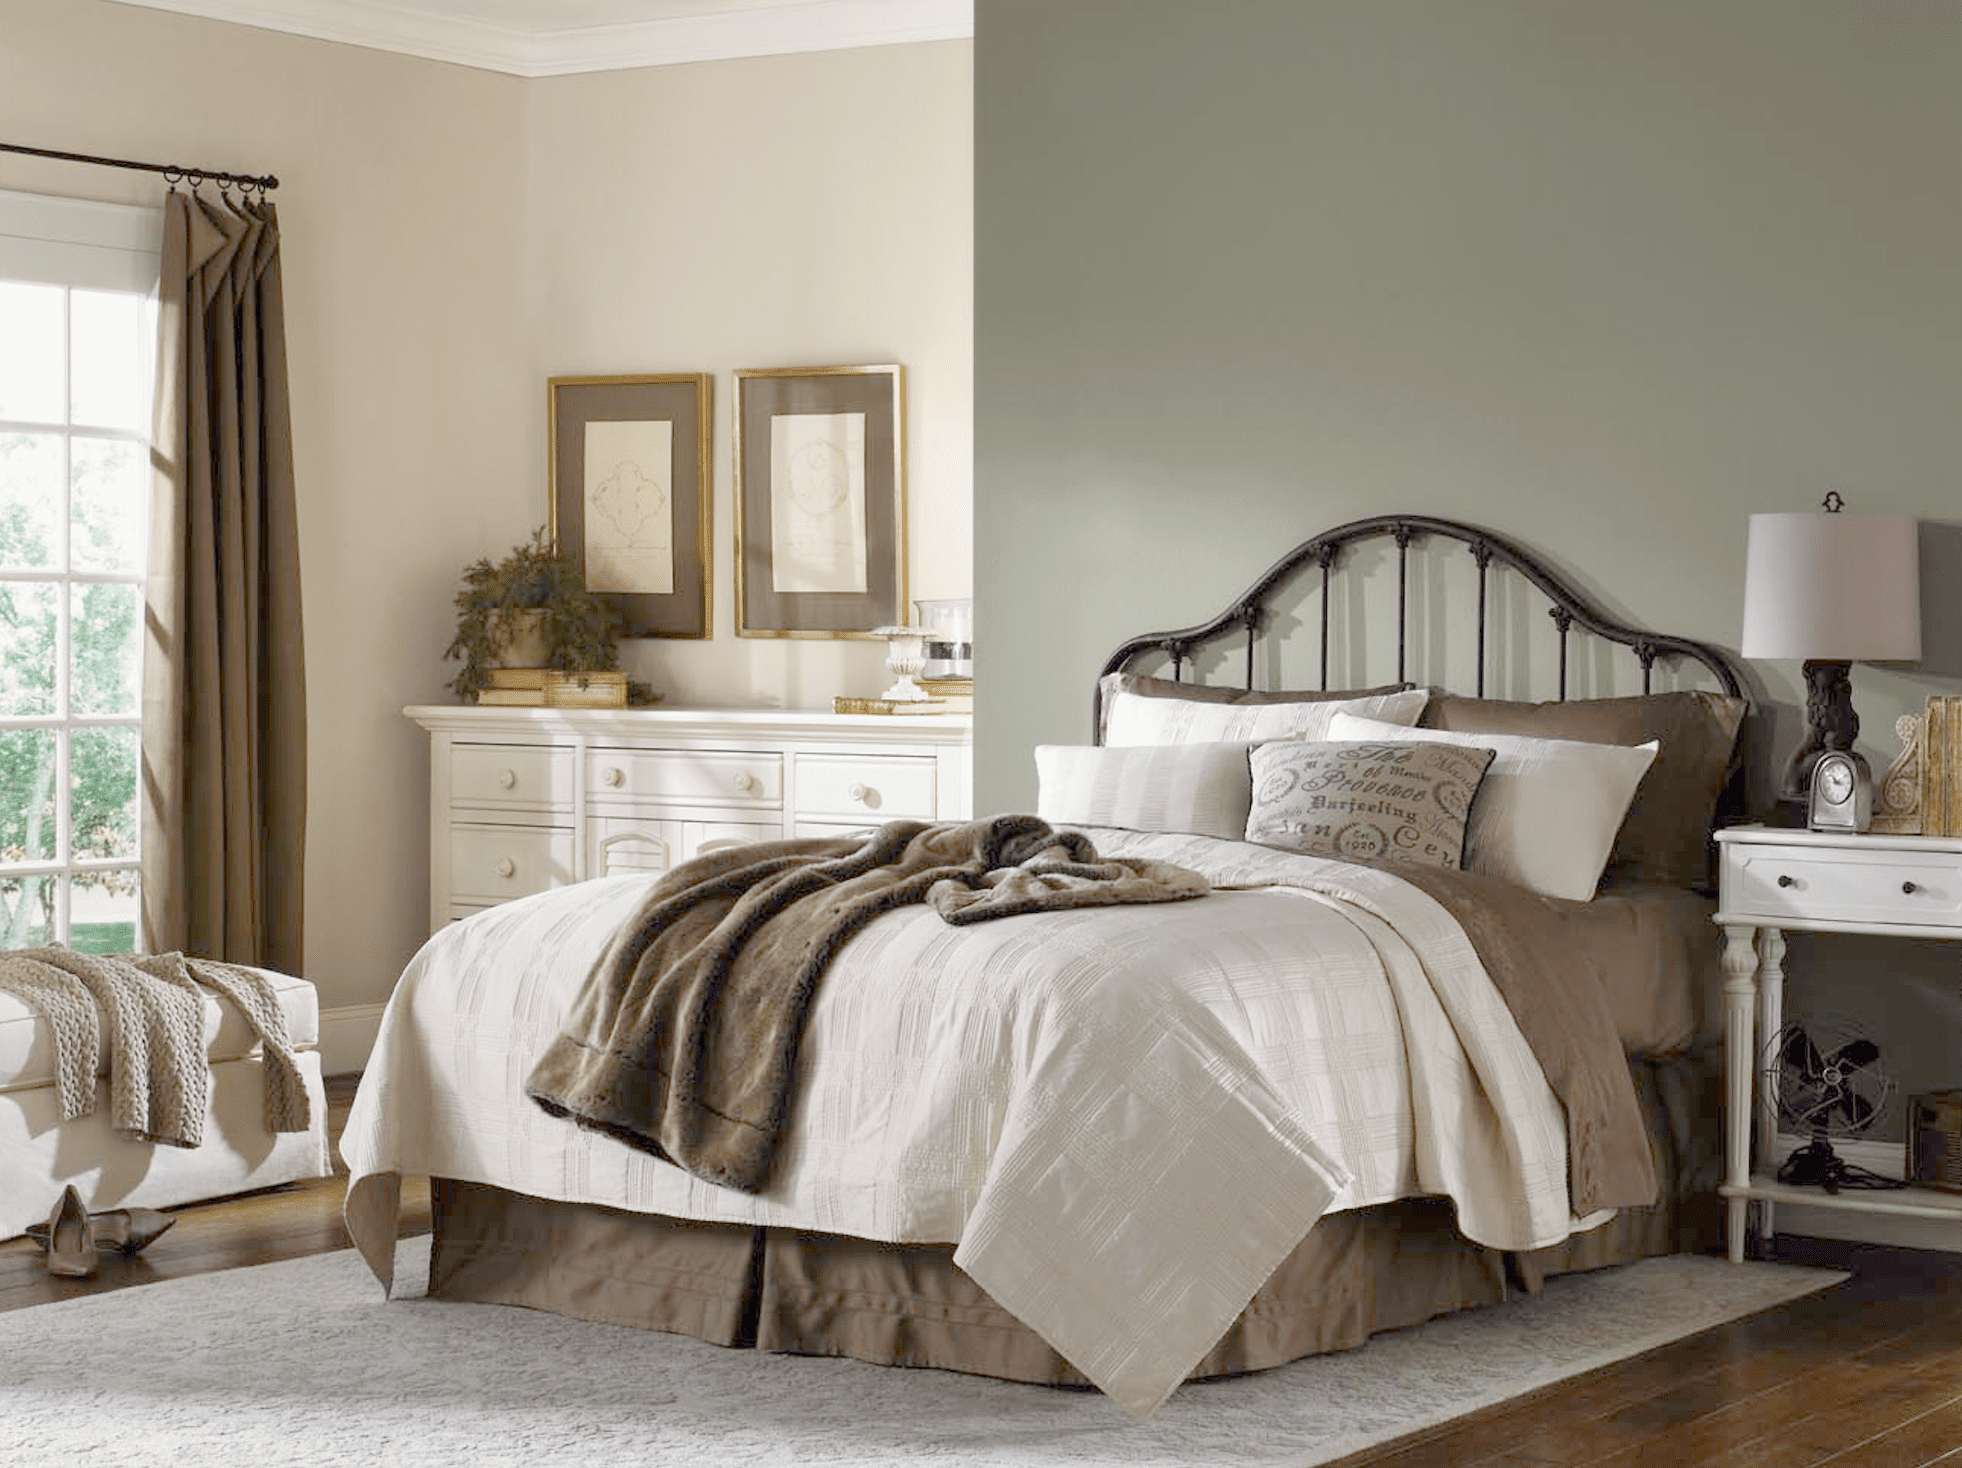 8 Relaxing Sherwin Williams Paint Colors For Bedrooms pertaining to dimensions 1962 X 1468